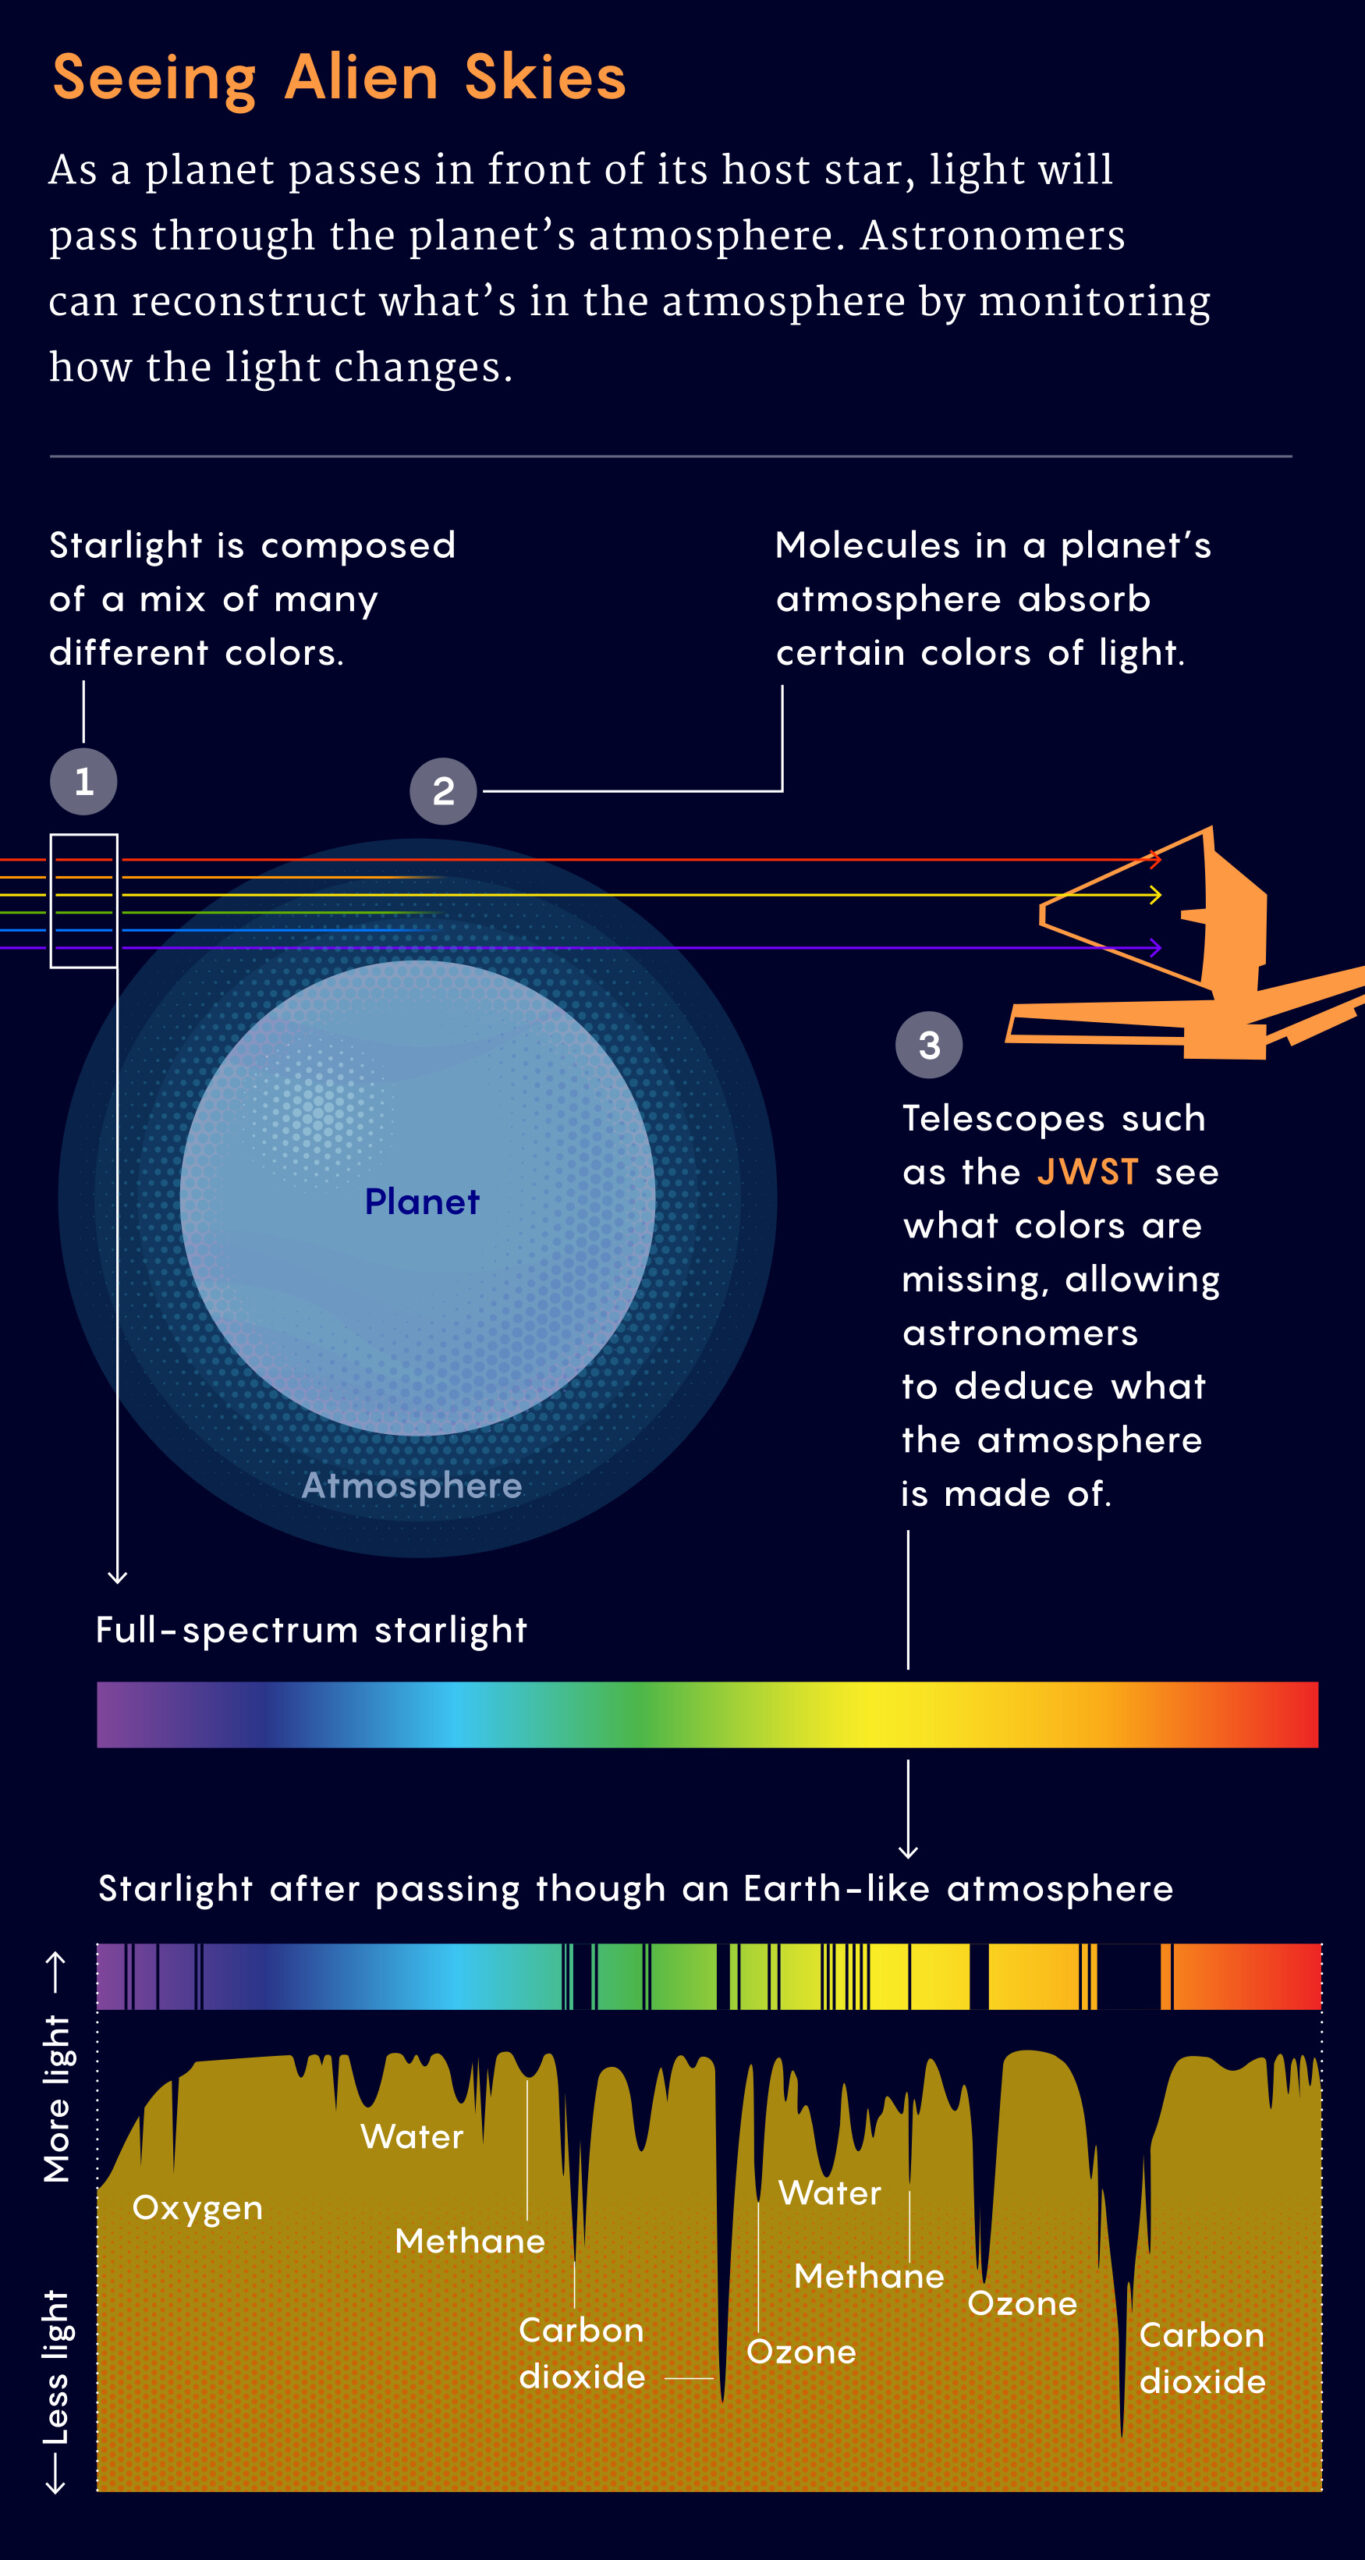 This graphic discusses seeing alien skies. As a planet passes in front of its host star, light will pass through the planet's atmosphere. Astronomers can reconstruct what's in the atmosphere by monitoring how the light changes.